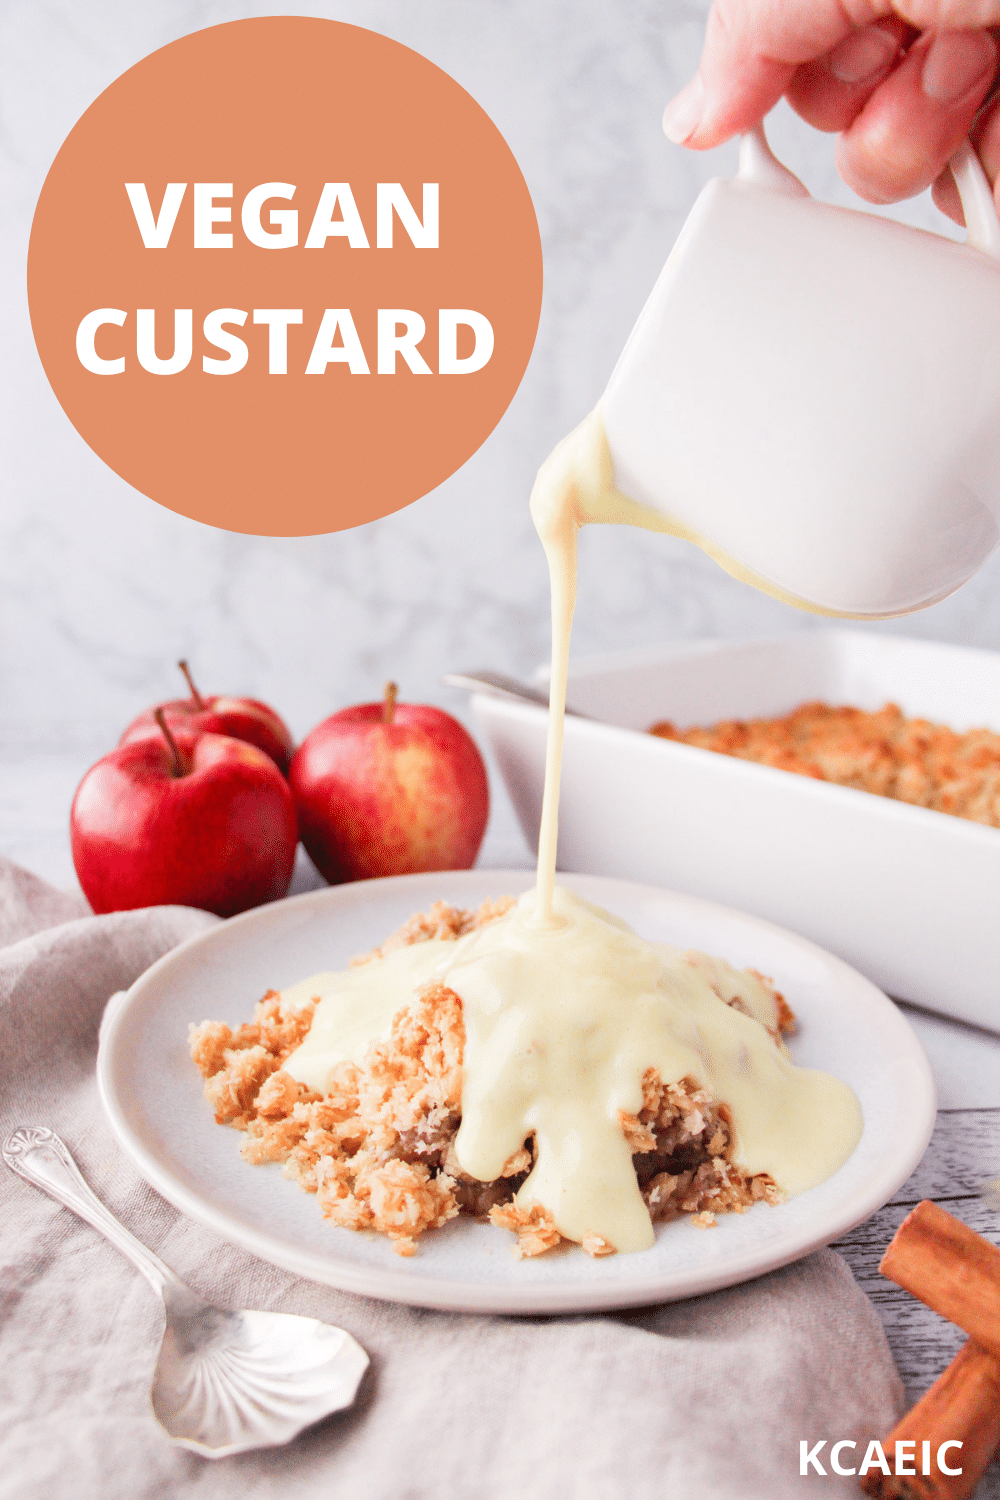 Vegan custard being poured over a vegan apple crumble, with apples and baking dish in background and text over lay, vegan custard and KCAEIC.